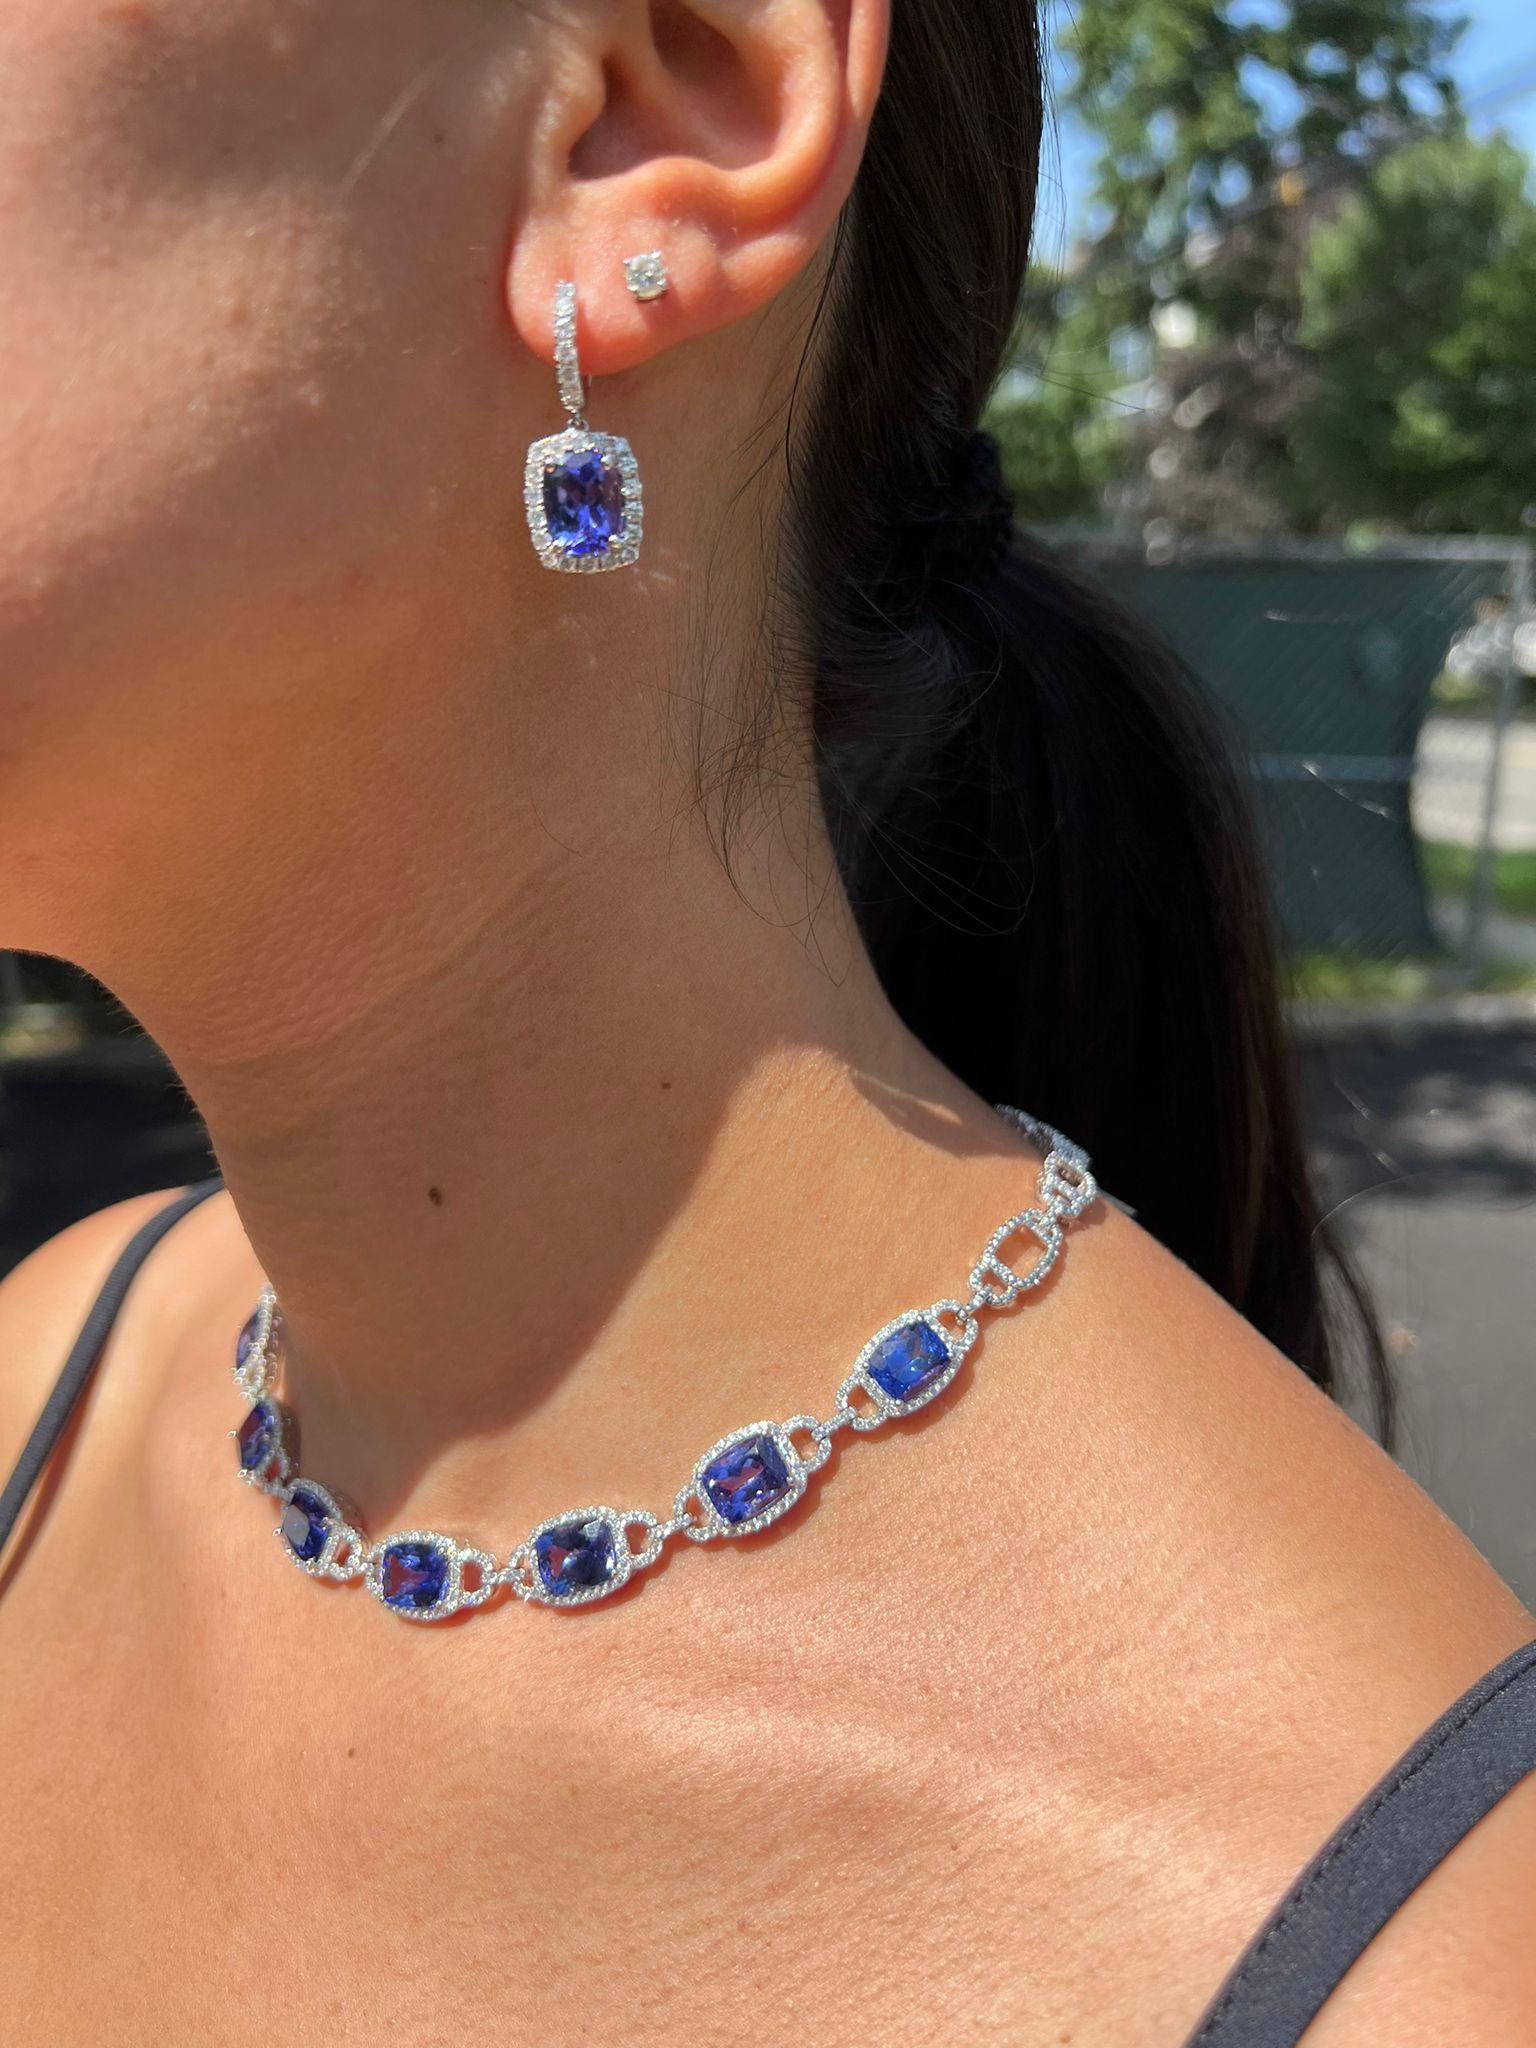 Women's Exquisite 14 Karat White Gold Cushion Tanzanite Necklace - Vivid AAA Quality For Sale